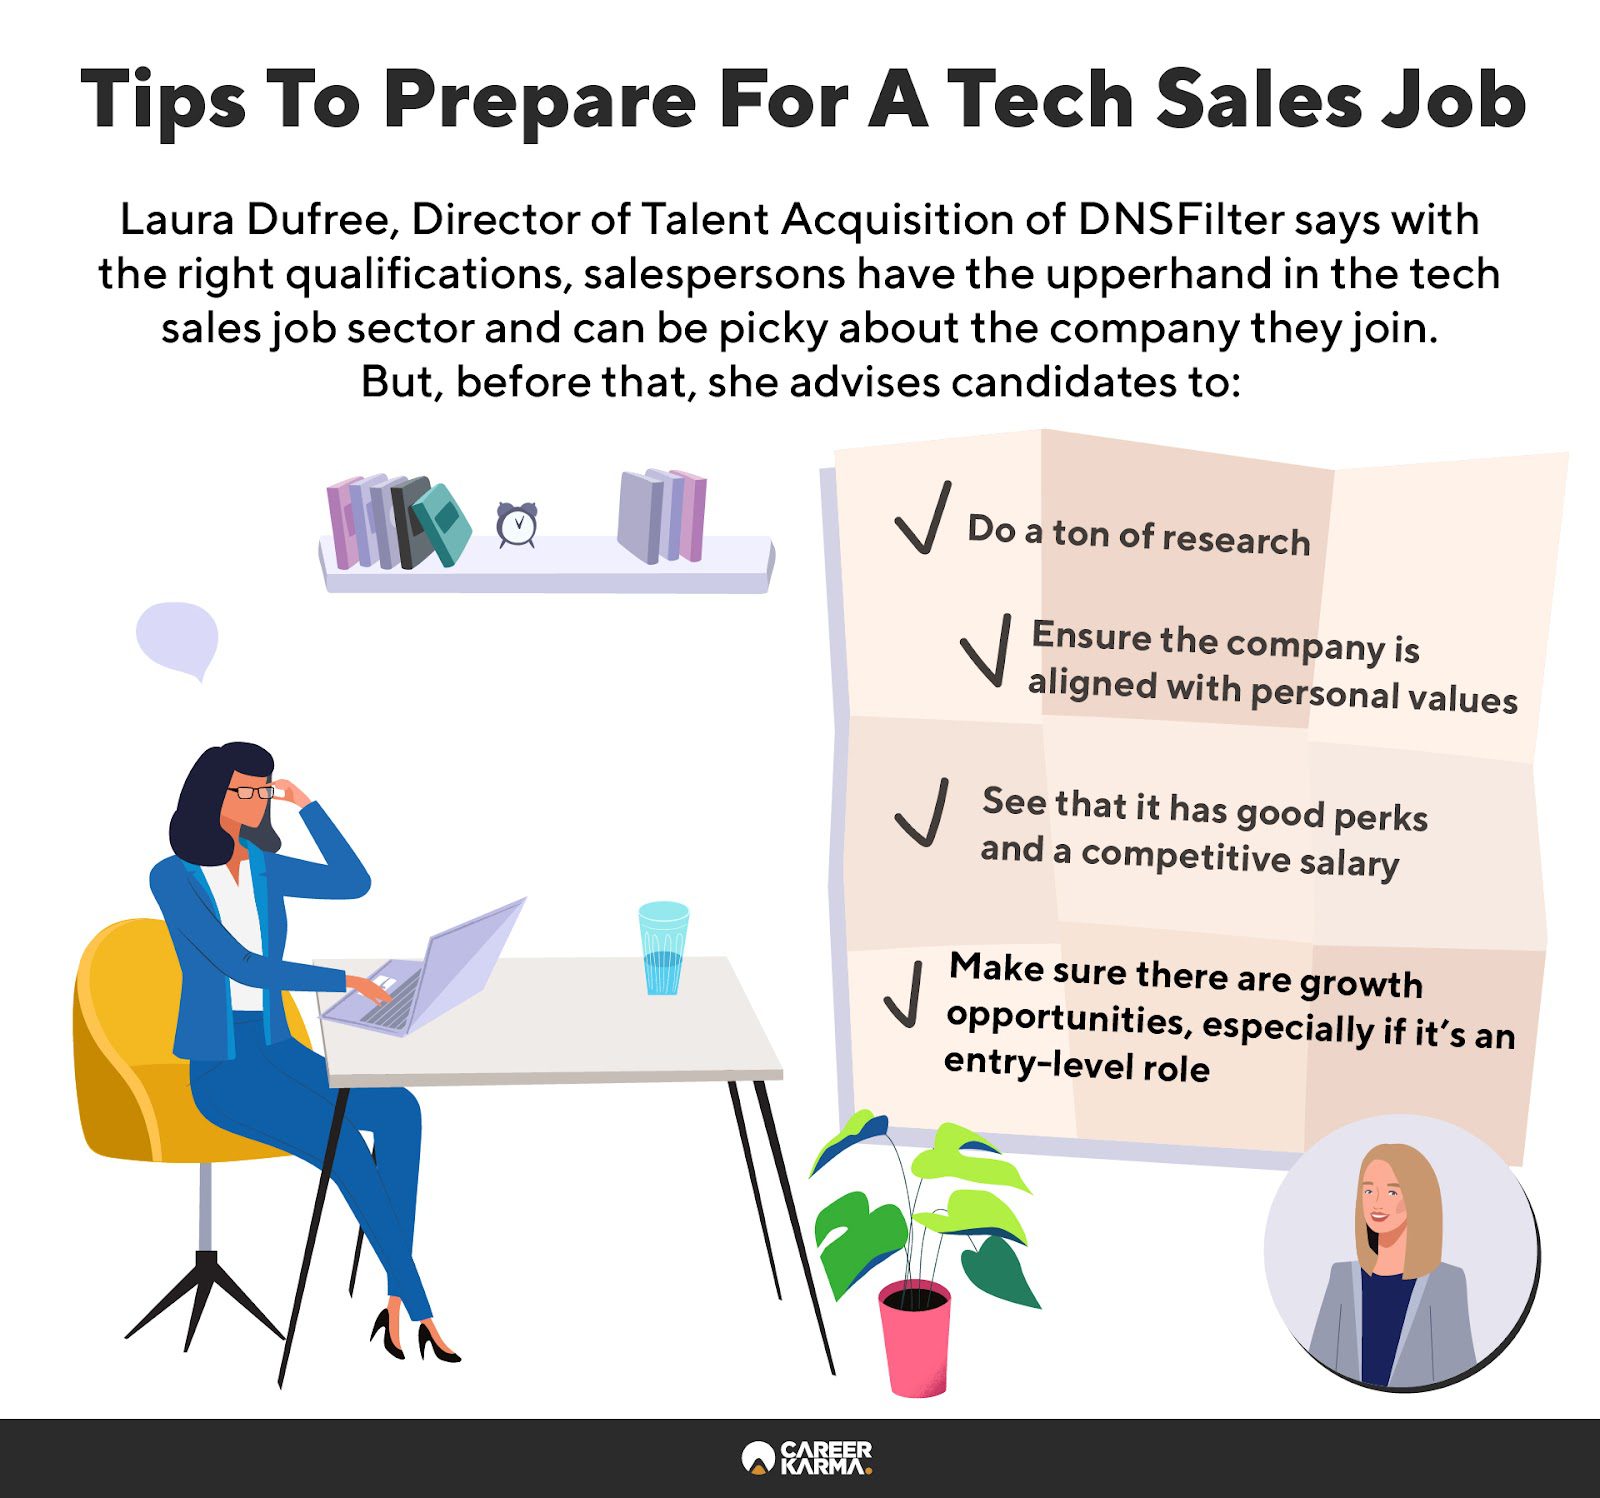 An infographic highlighting tips to prepare for a tech sales career